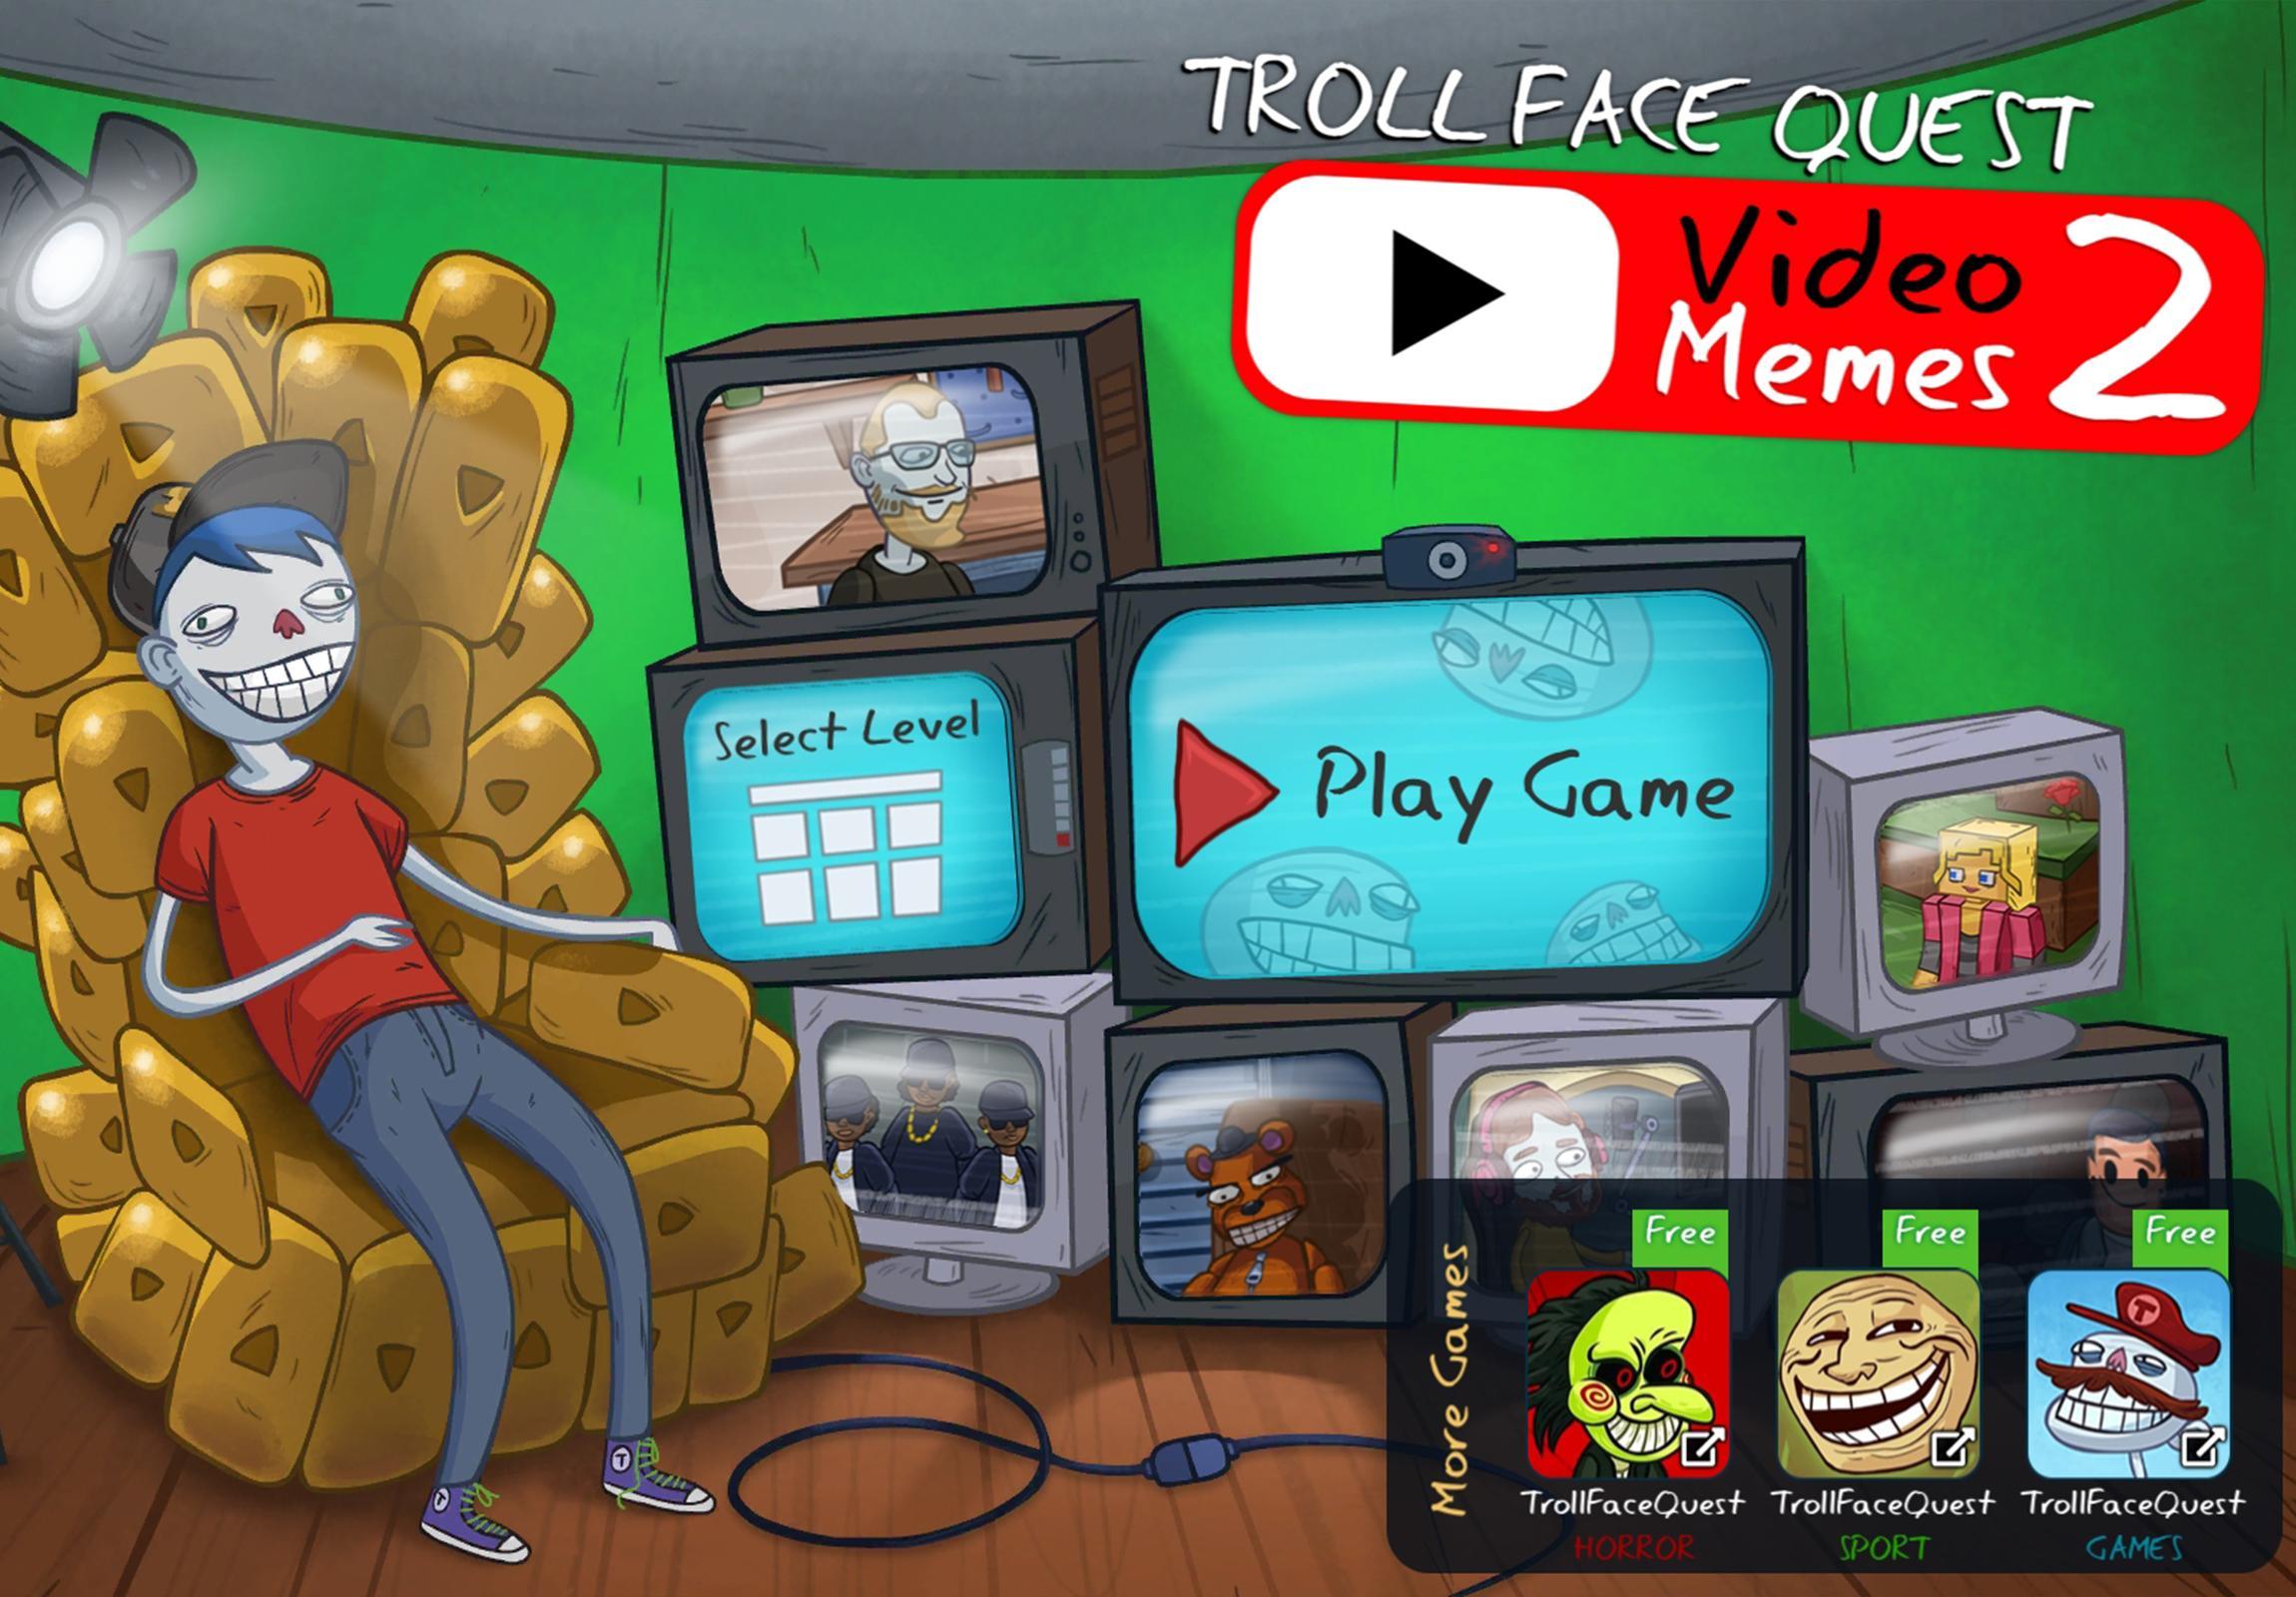 Troll Face Quest Video Memes 2 for Android - APK Download